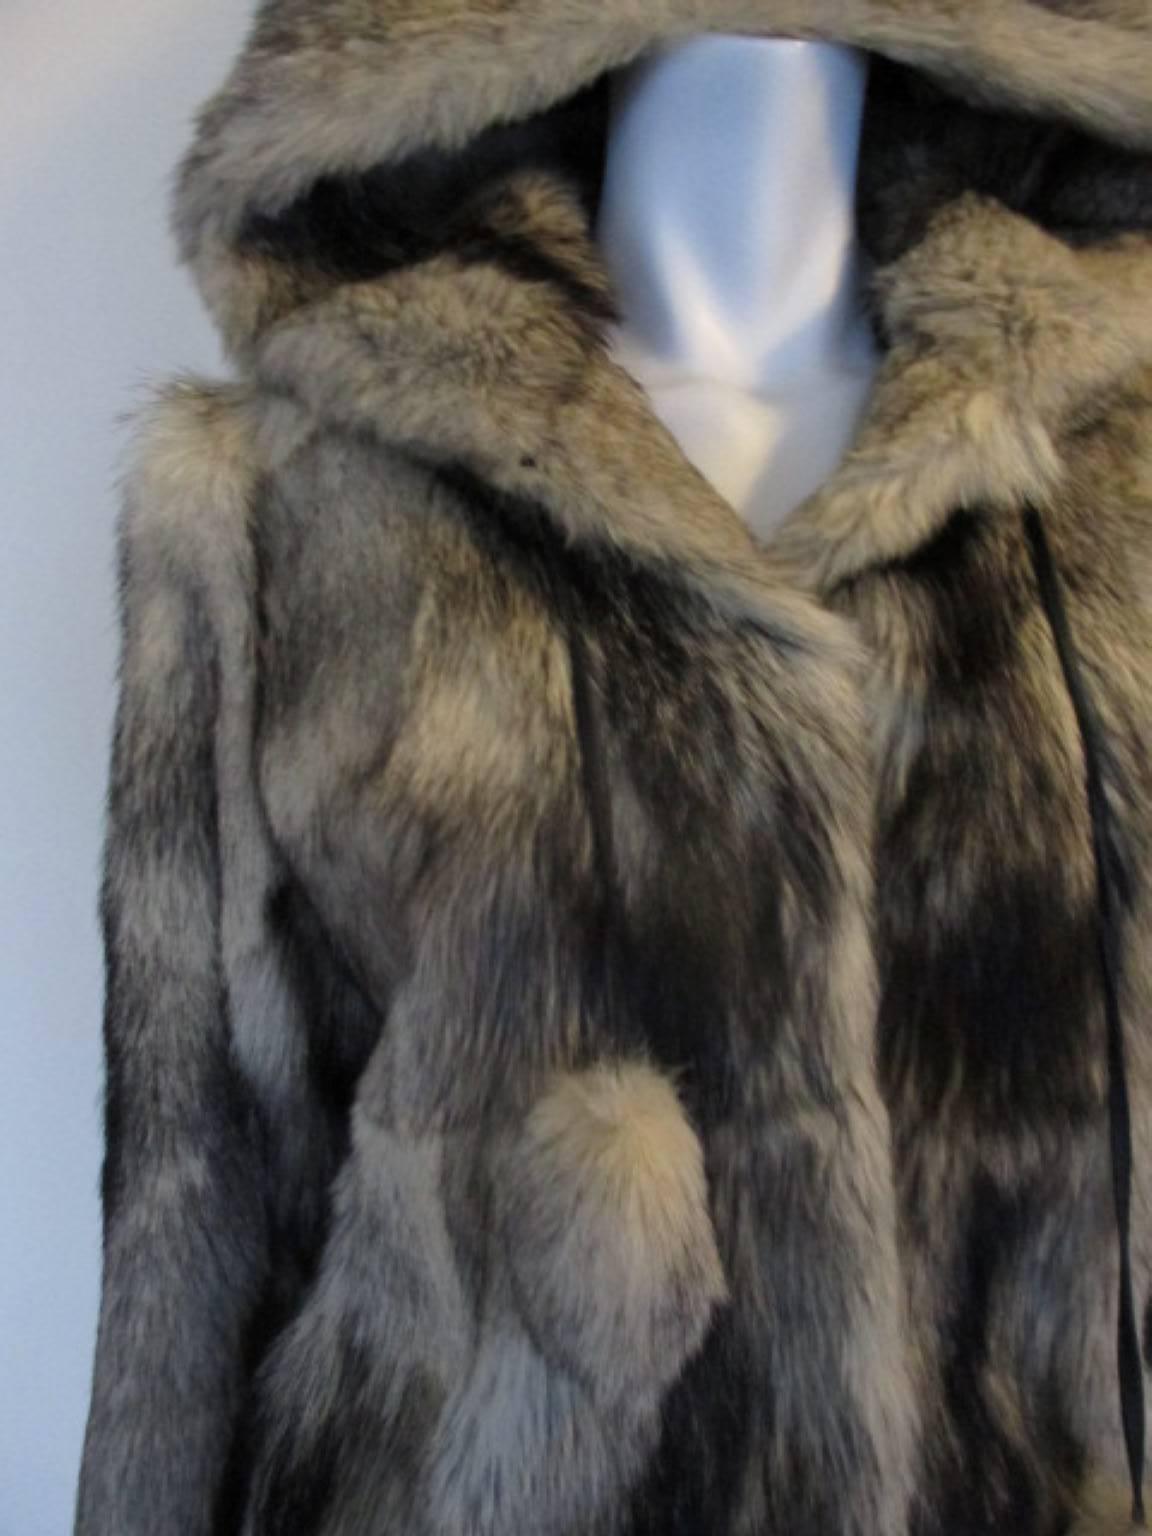 This coat is simply exquisite & super glam. In prestige vintage condition. Well looked after. This coat is extremely rare and one of a kind.
The hood closes with draw strings tipped with wolf tail.

The coat is made in Germany, Echt Pelz